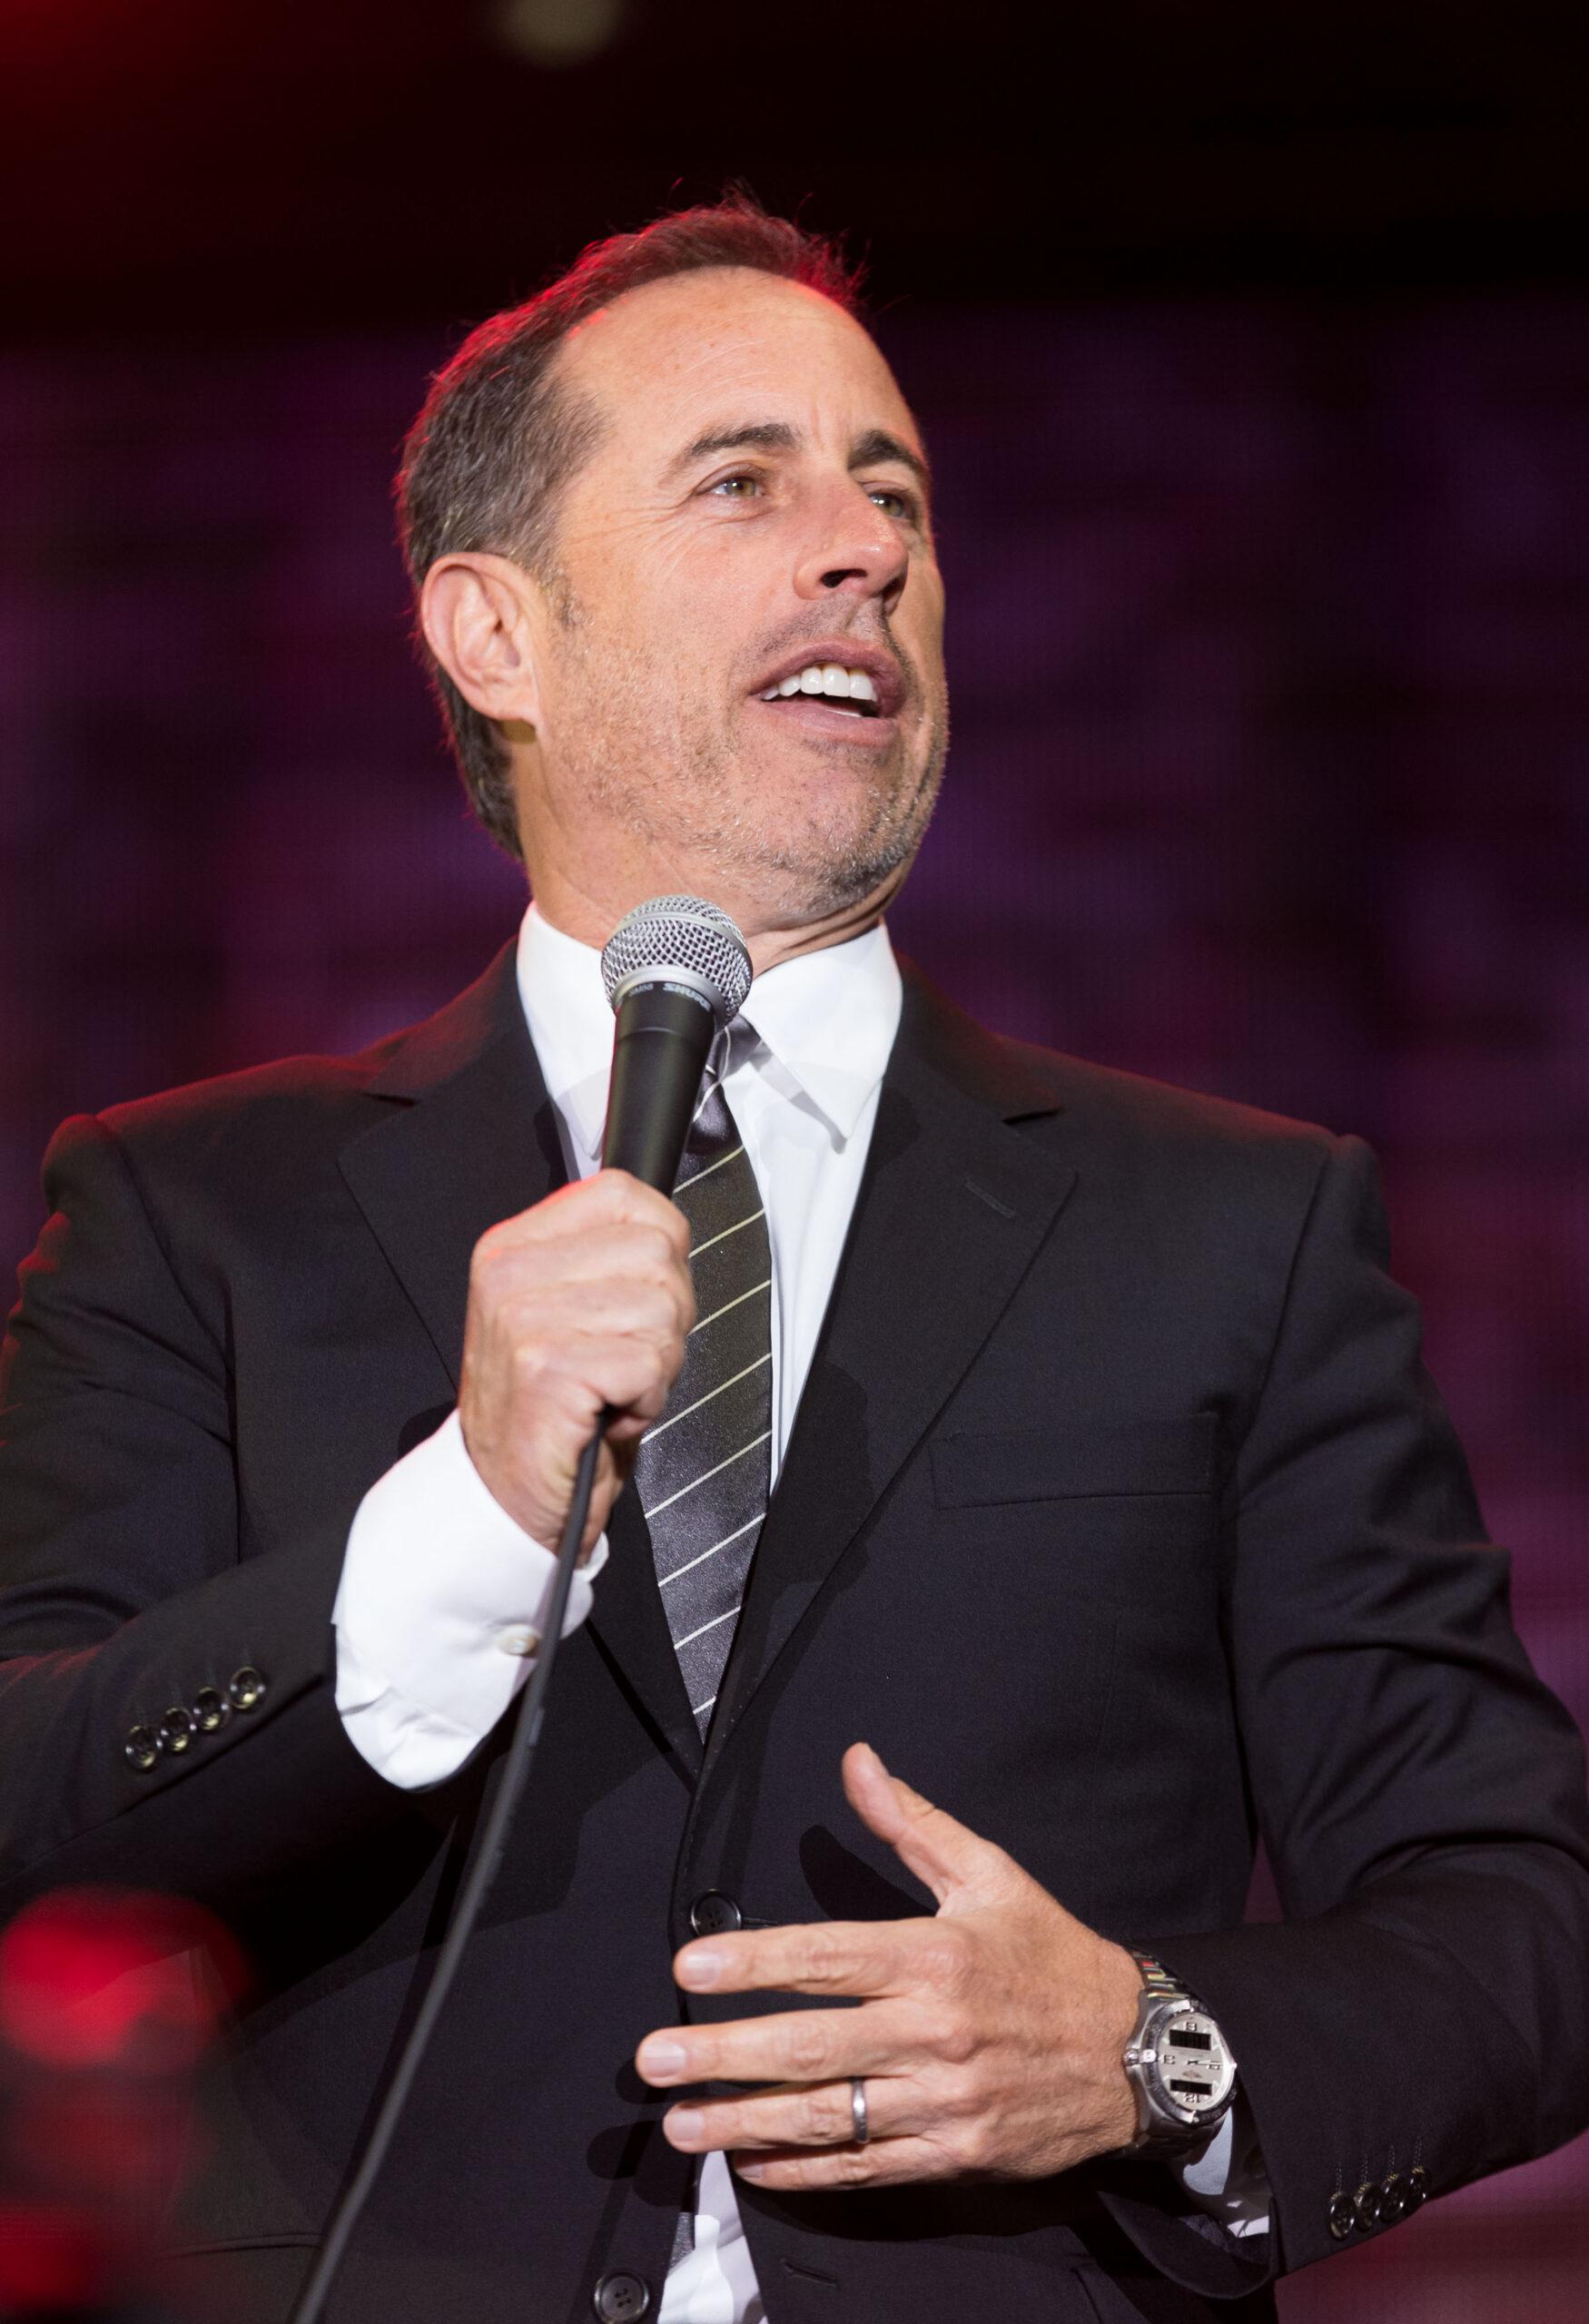 Jerry Seinfeld at the Comedy Central's Clusterfest - Sunday